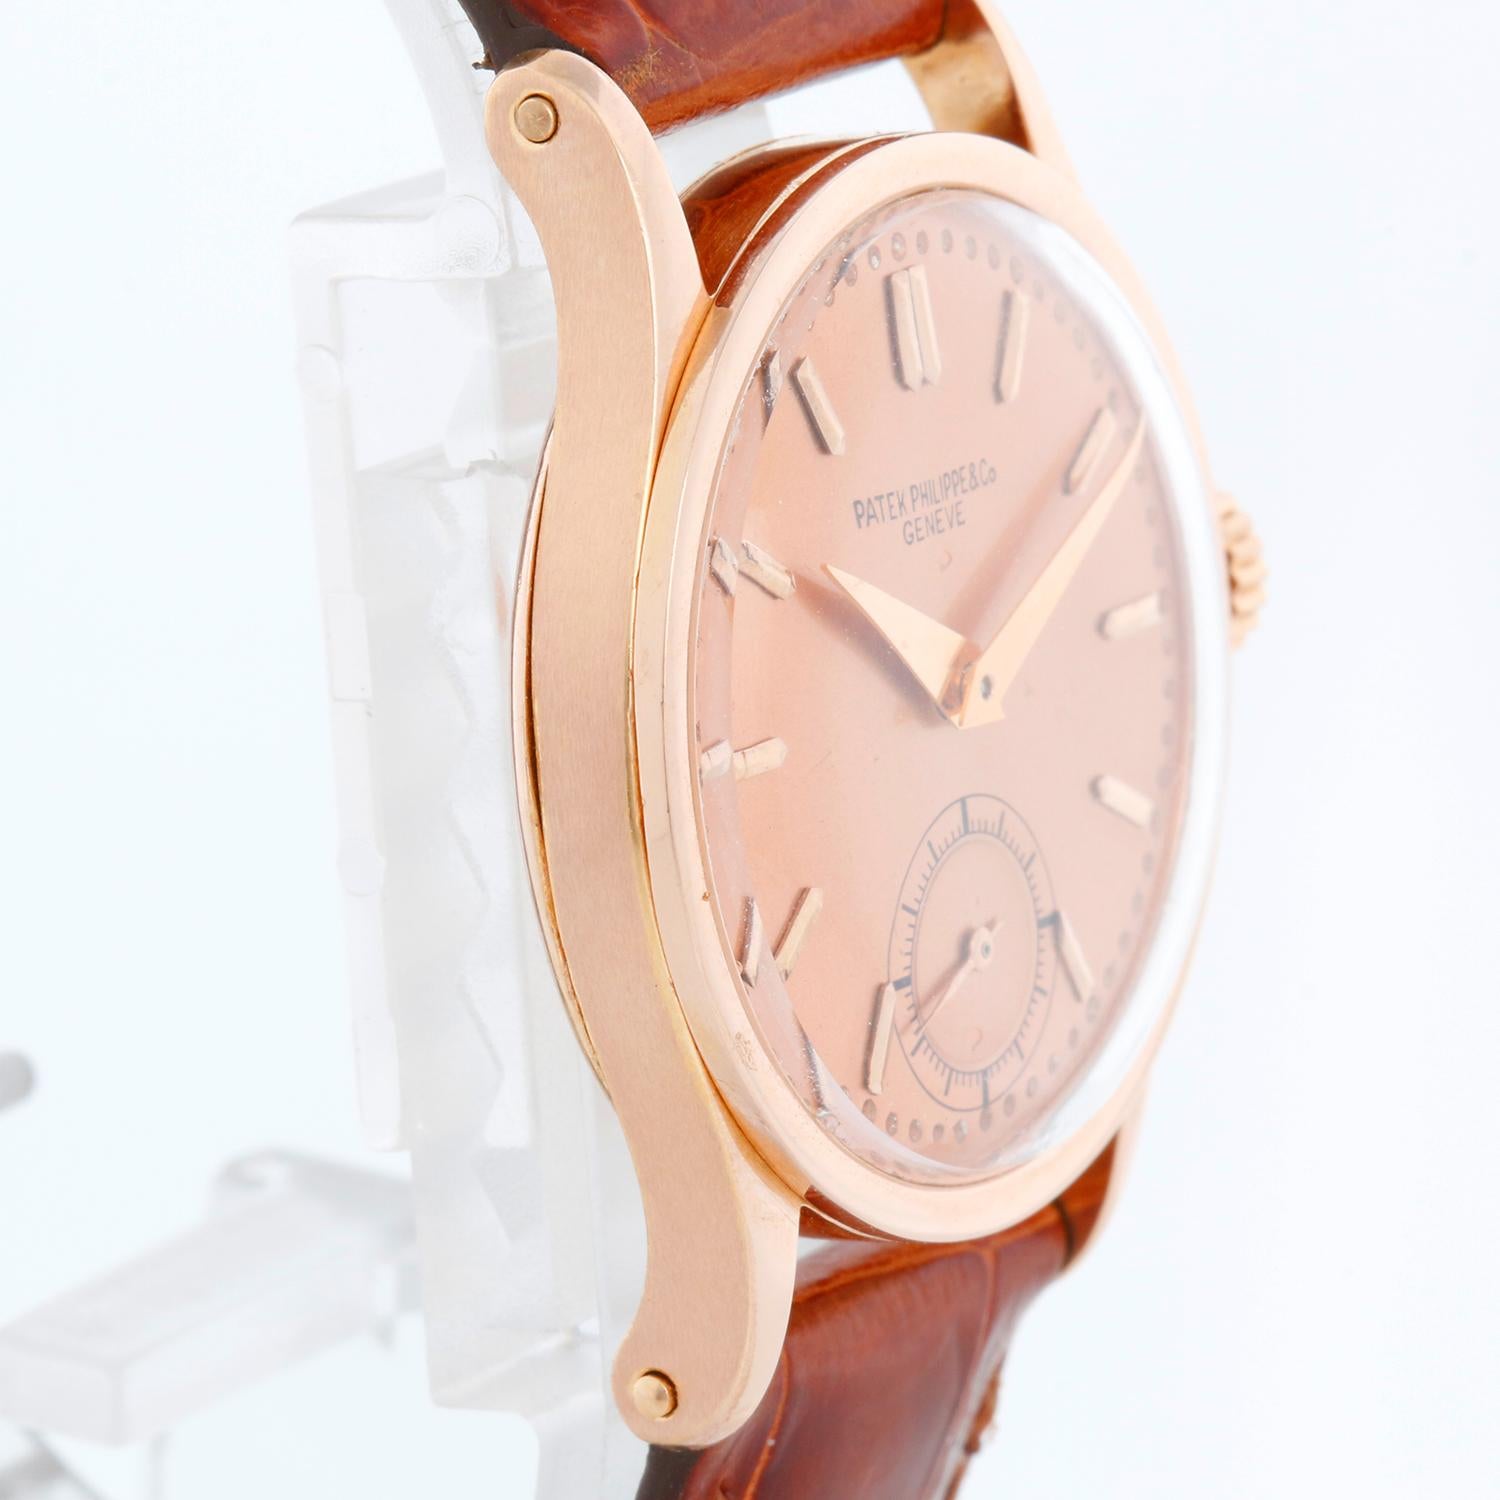 Patek Philippe Ref 96 With Rare Pink Dial Calatrava 18k Rose Gold Men's Watch In Excellent Condition For Sale In Dallas, TX